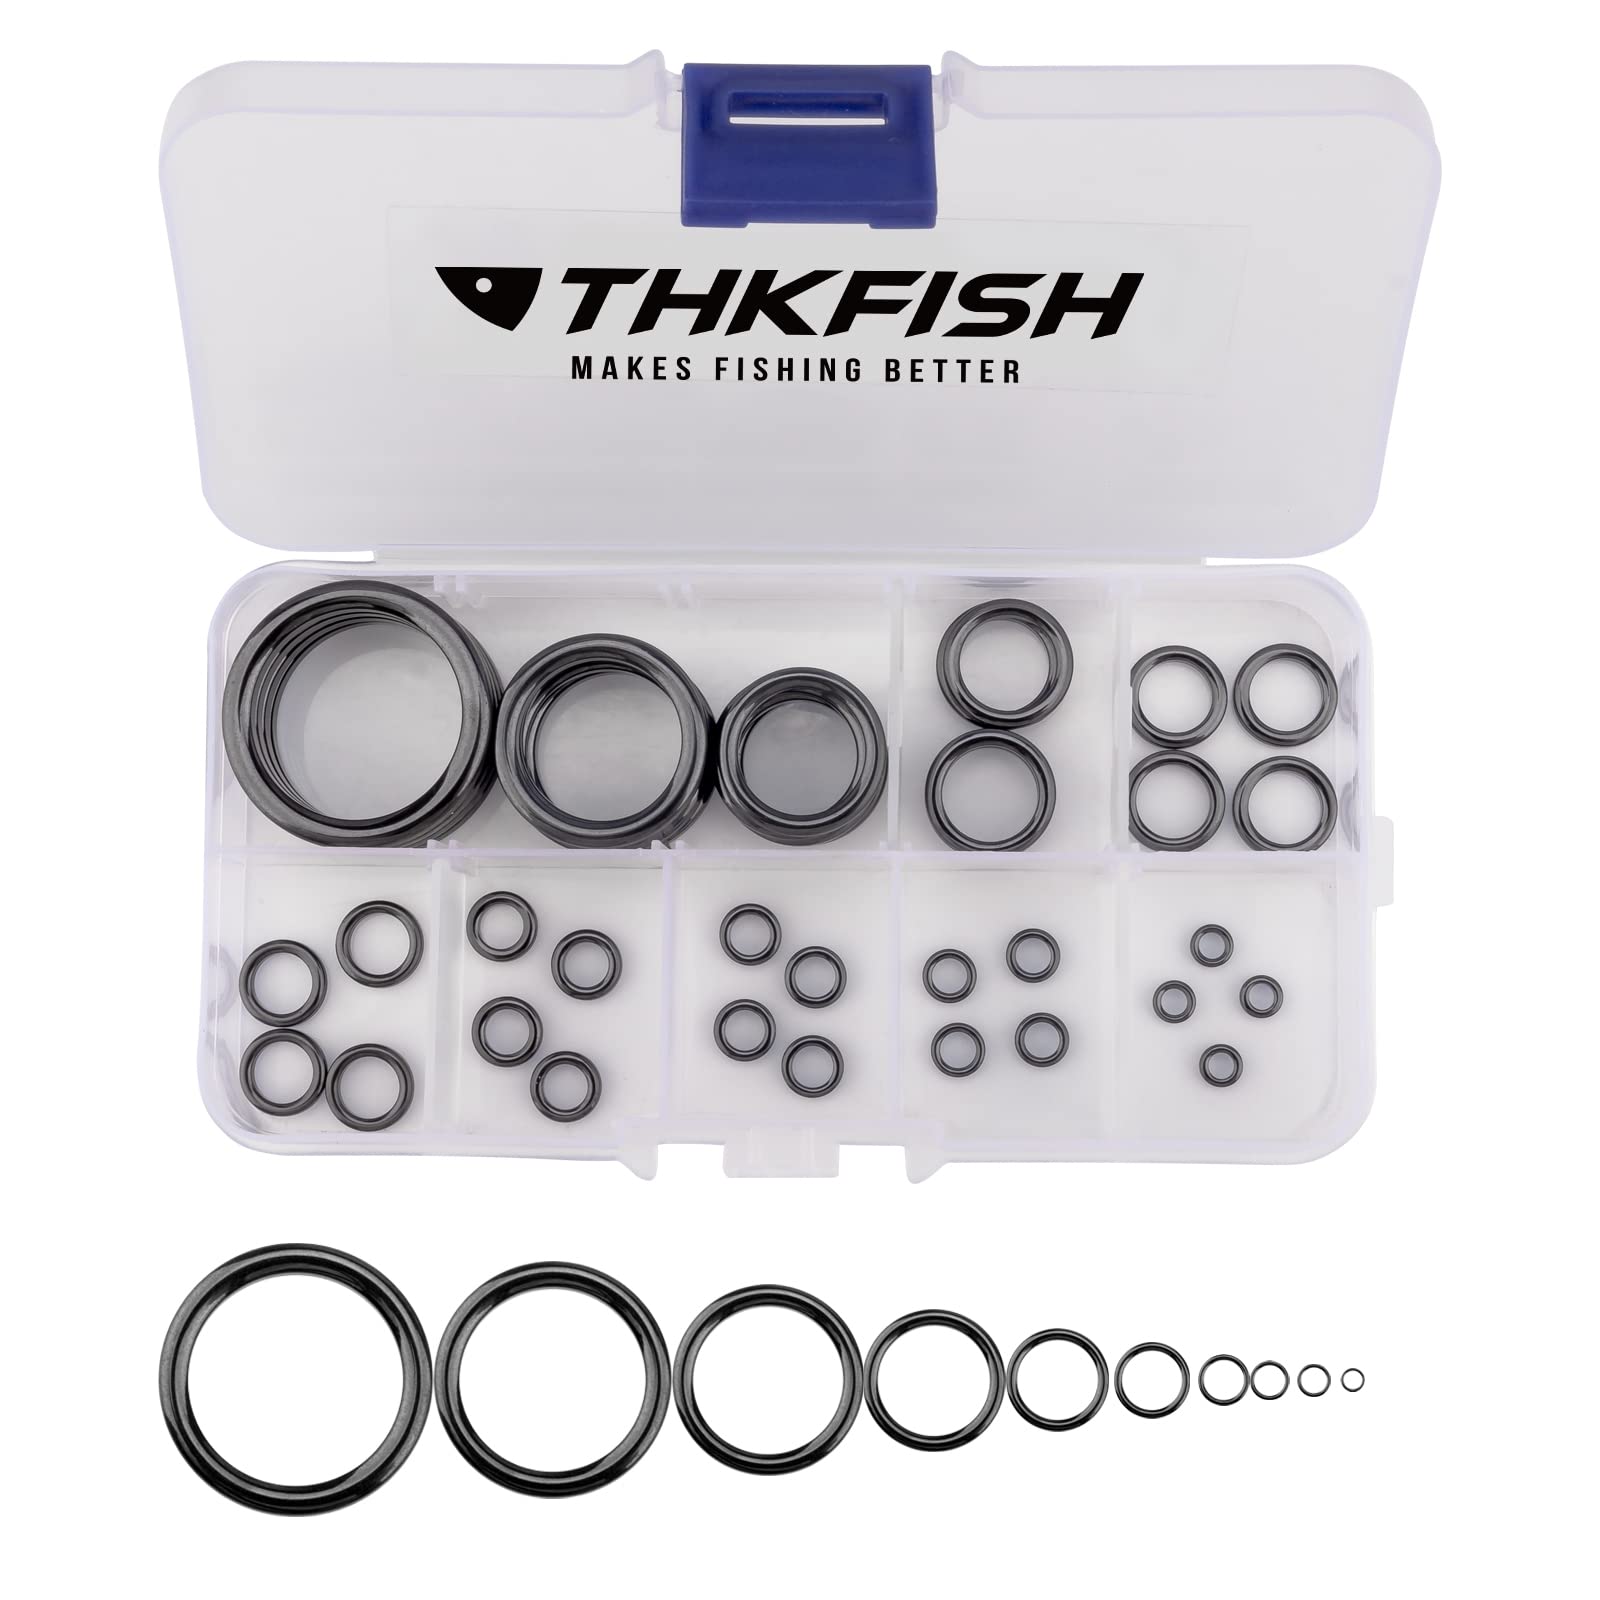 Hifisher Fishing Rod Tip Repair Kit: 40pcs 8 Sizes Top Guides ,1oz Epoxy  Resin, Brush, Measure Cup, Fishing Rod Guides Replacement kit, Stainless  Steel Ceramic Ring Guide Tips : : Sports 